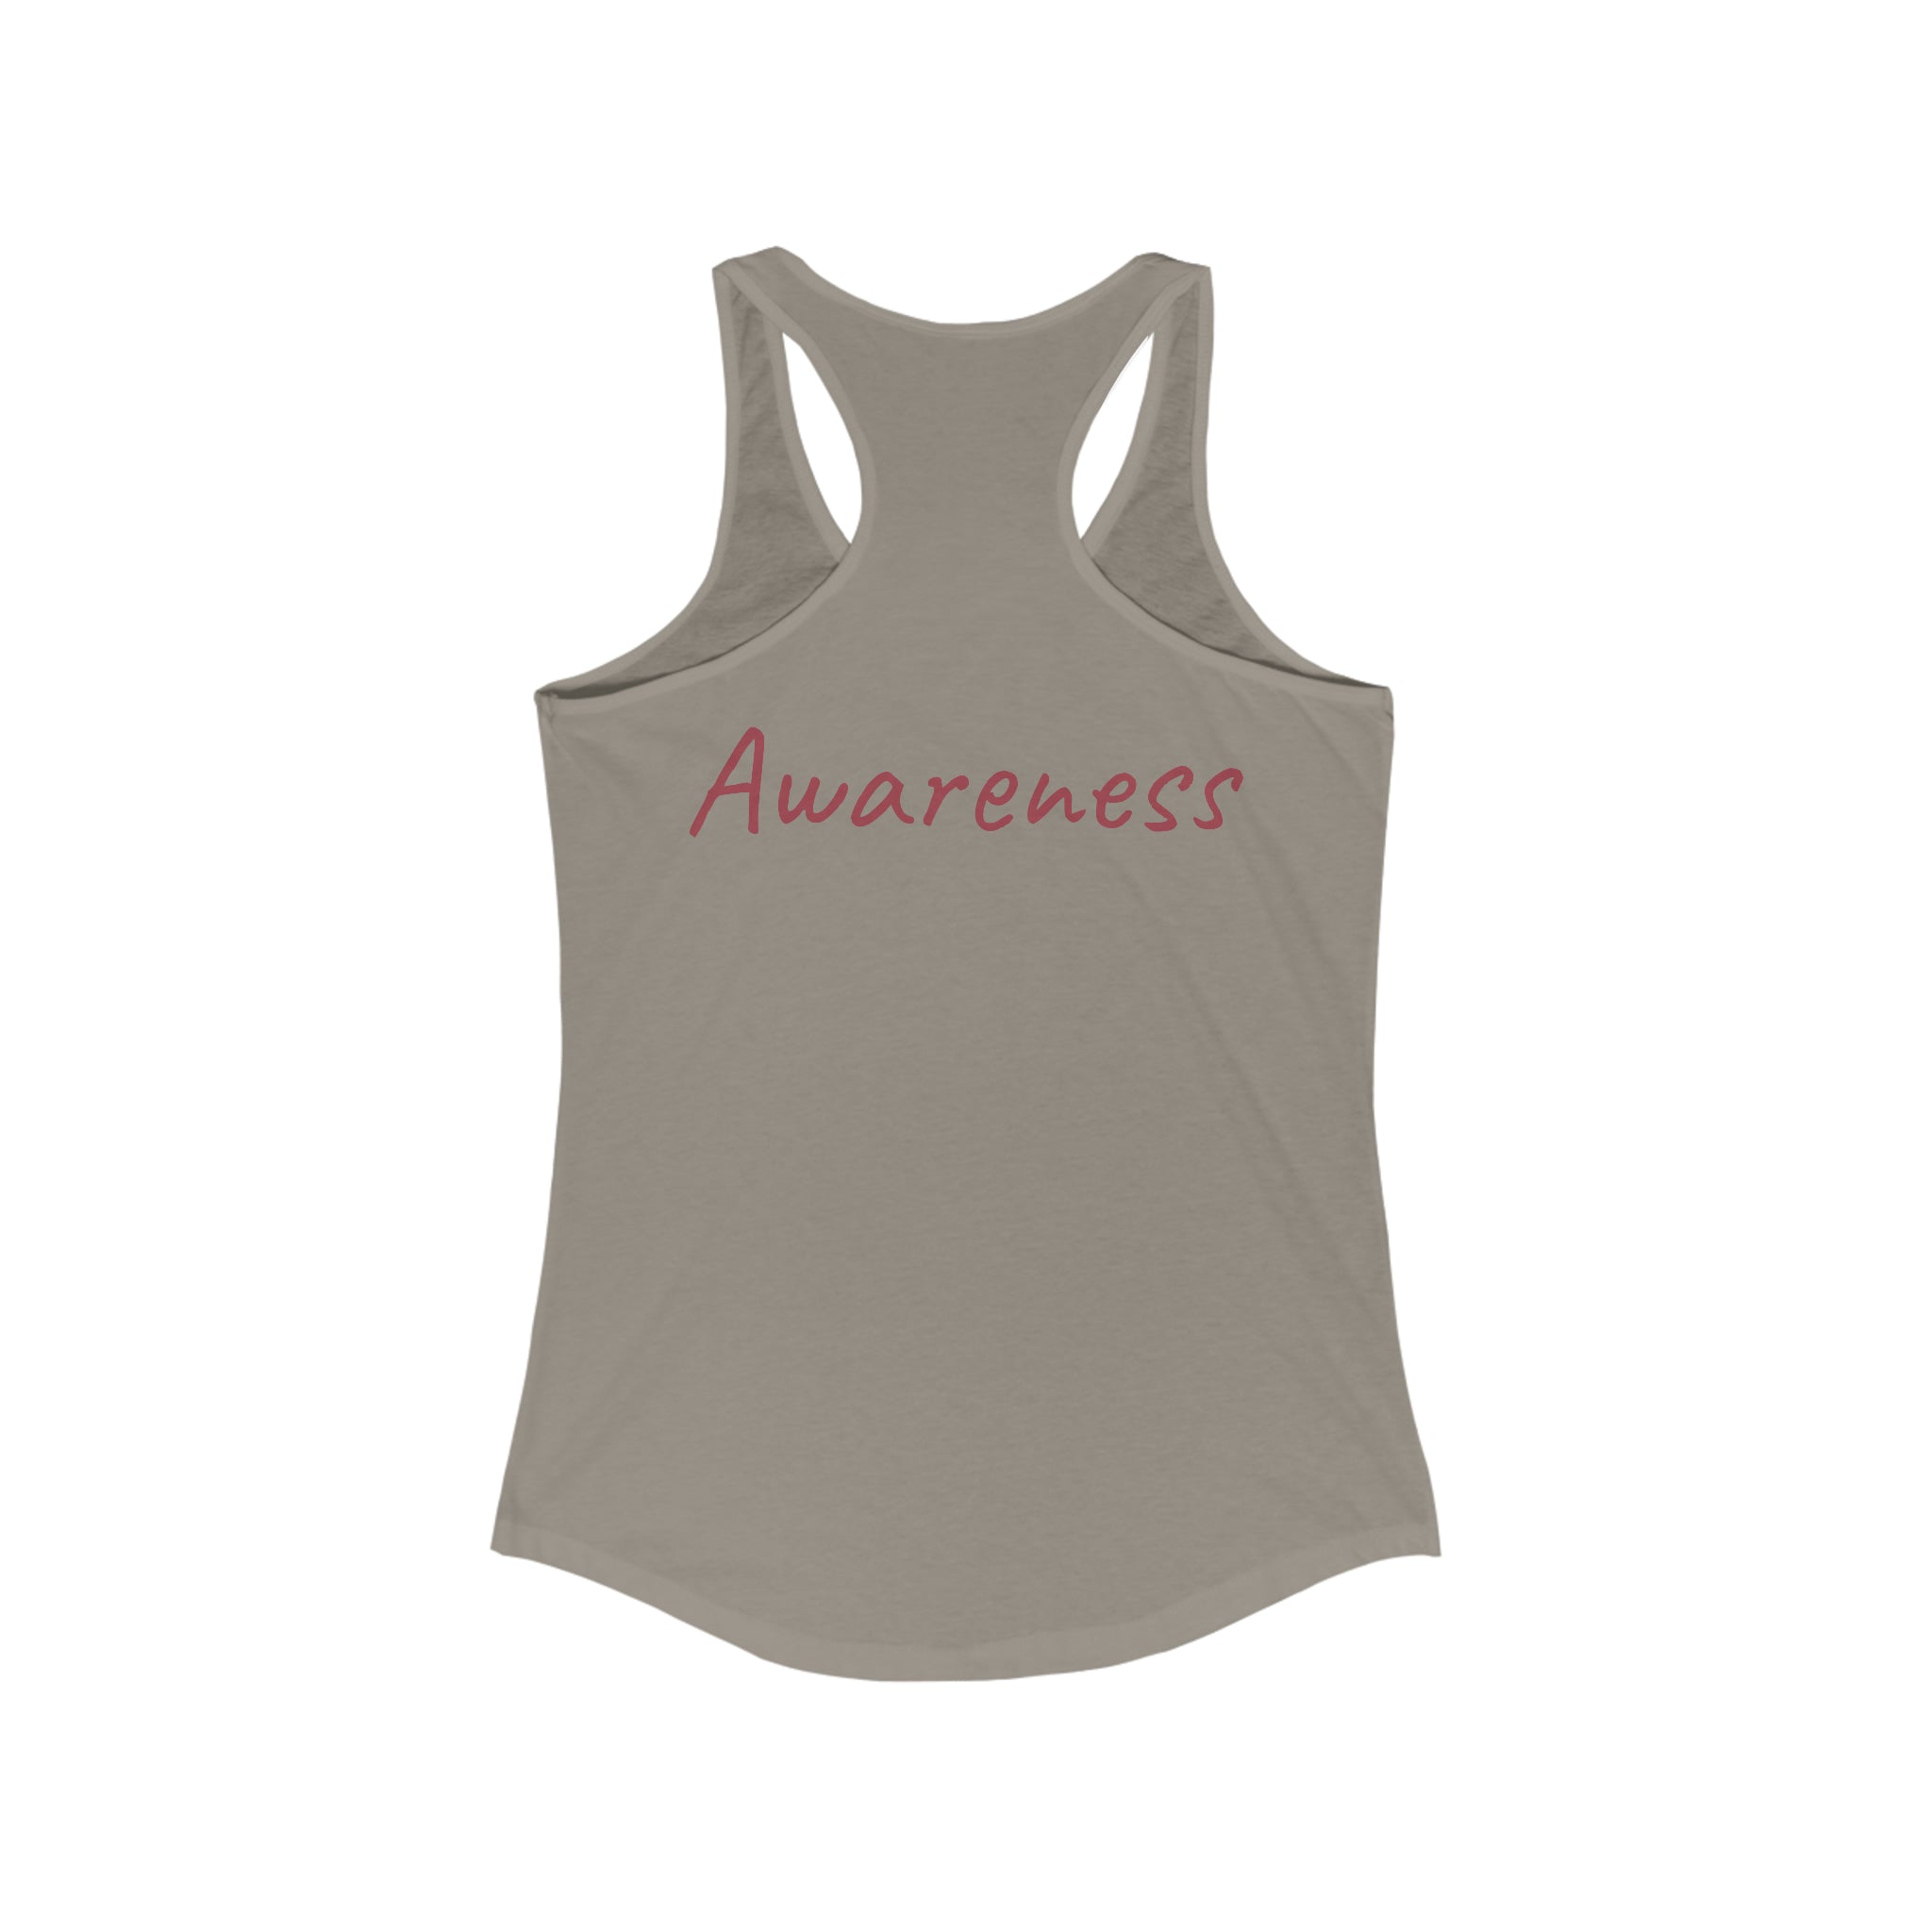 Awareness Racerback Tank: Mental Health Advocacy Solid Warm Gray Activewear Athletic Tank Gym Clothes Performance Tank Racerback Sleeveless Top Sporty Apparel Tank Top Women's Tank Workout Gear Yoga Tank Tank Top 14032448730604720509_2048_b277b3a1-d775-41b0-b3ee-dbd672a208b3 Printify